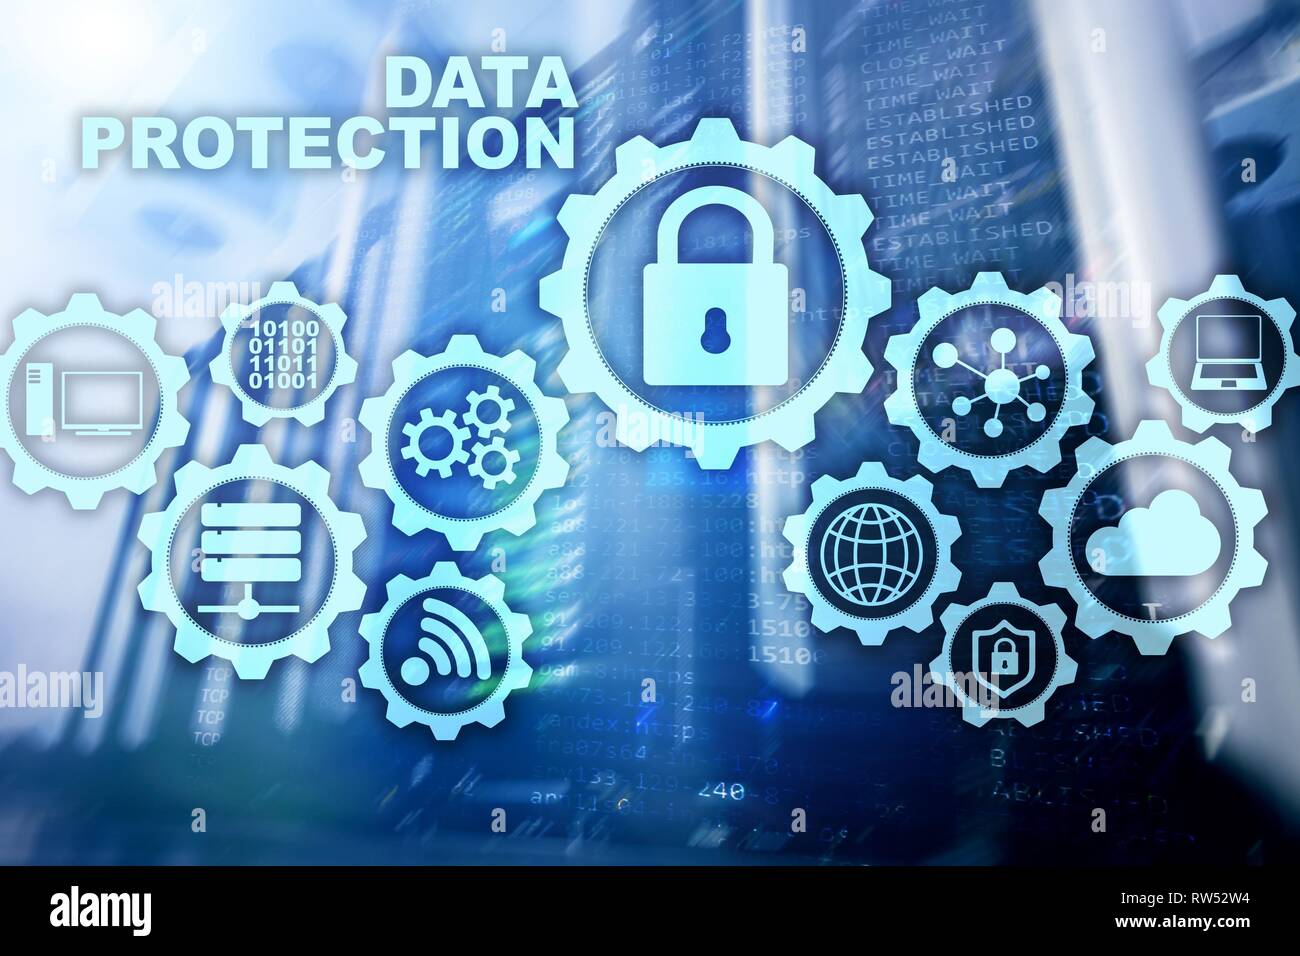 Server data protection concept. Safety of information from virus cyber digital internet technology. Stock Photo